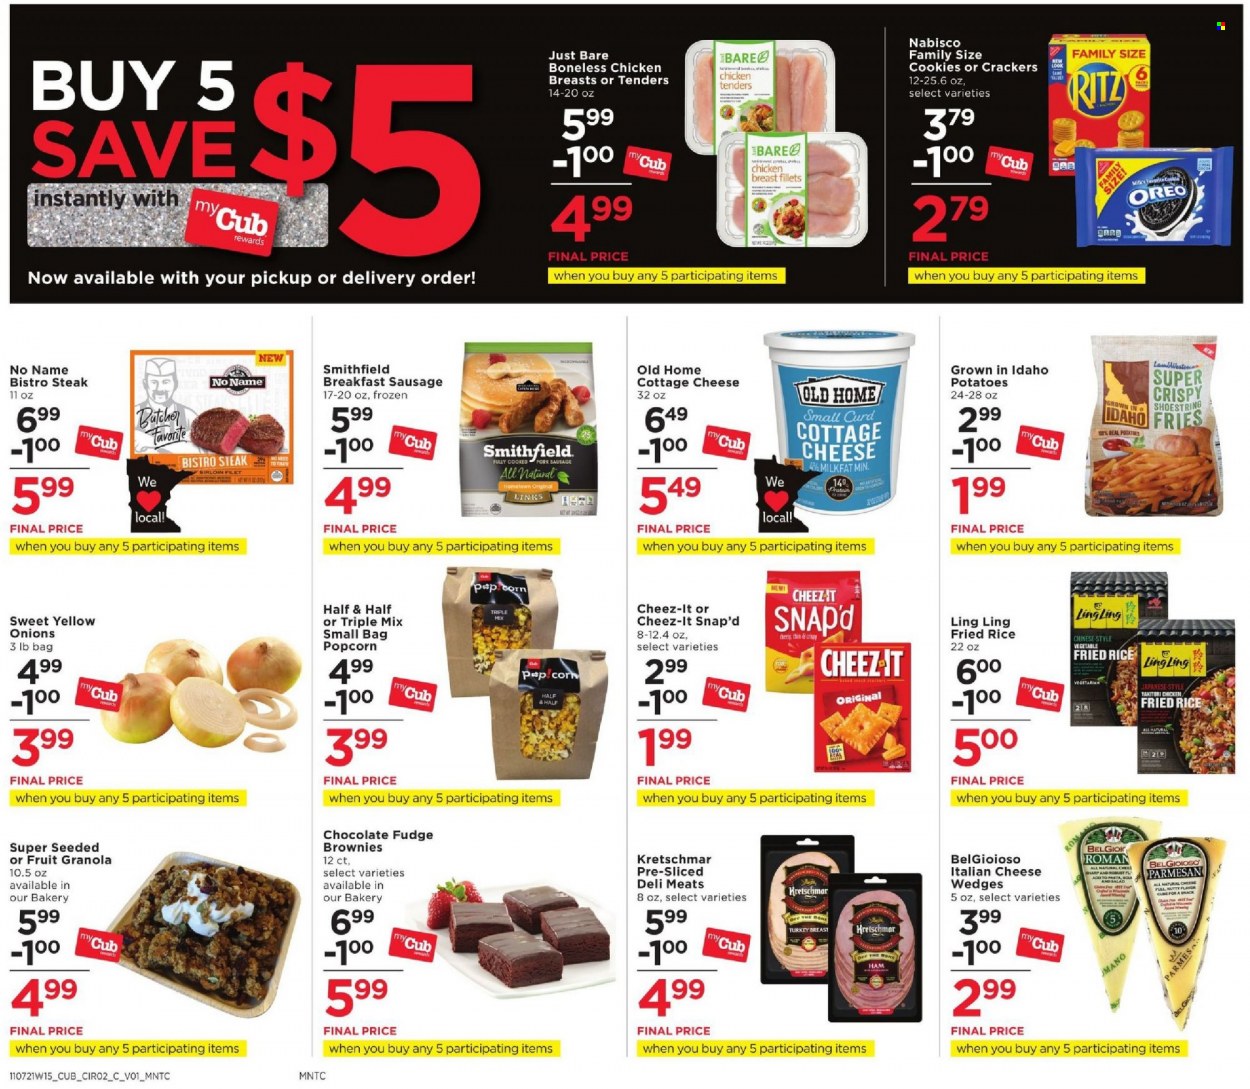 thumbnail - Cub Foods Flyer - 11/07/2021 - 11/13/2021 - Sales products - brownies, corn, potatoes, onion, No Name, chicken tenders, ham, ham off the bone, sausage, cottage cheese, parmesan, cheese, Oreo, potato fries, cookies, fudge, chocolate, crackers, RITZ, Cheez-It, granola, chicken breasts, steak, Half and half. Page 2.